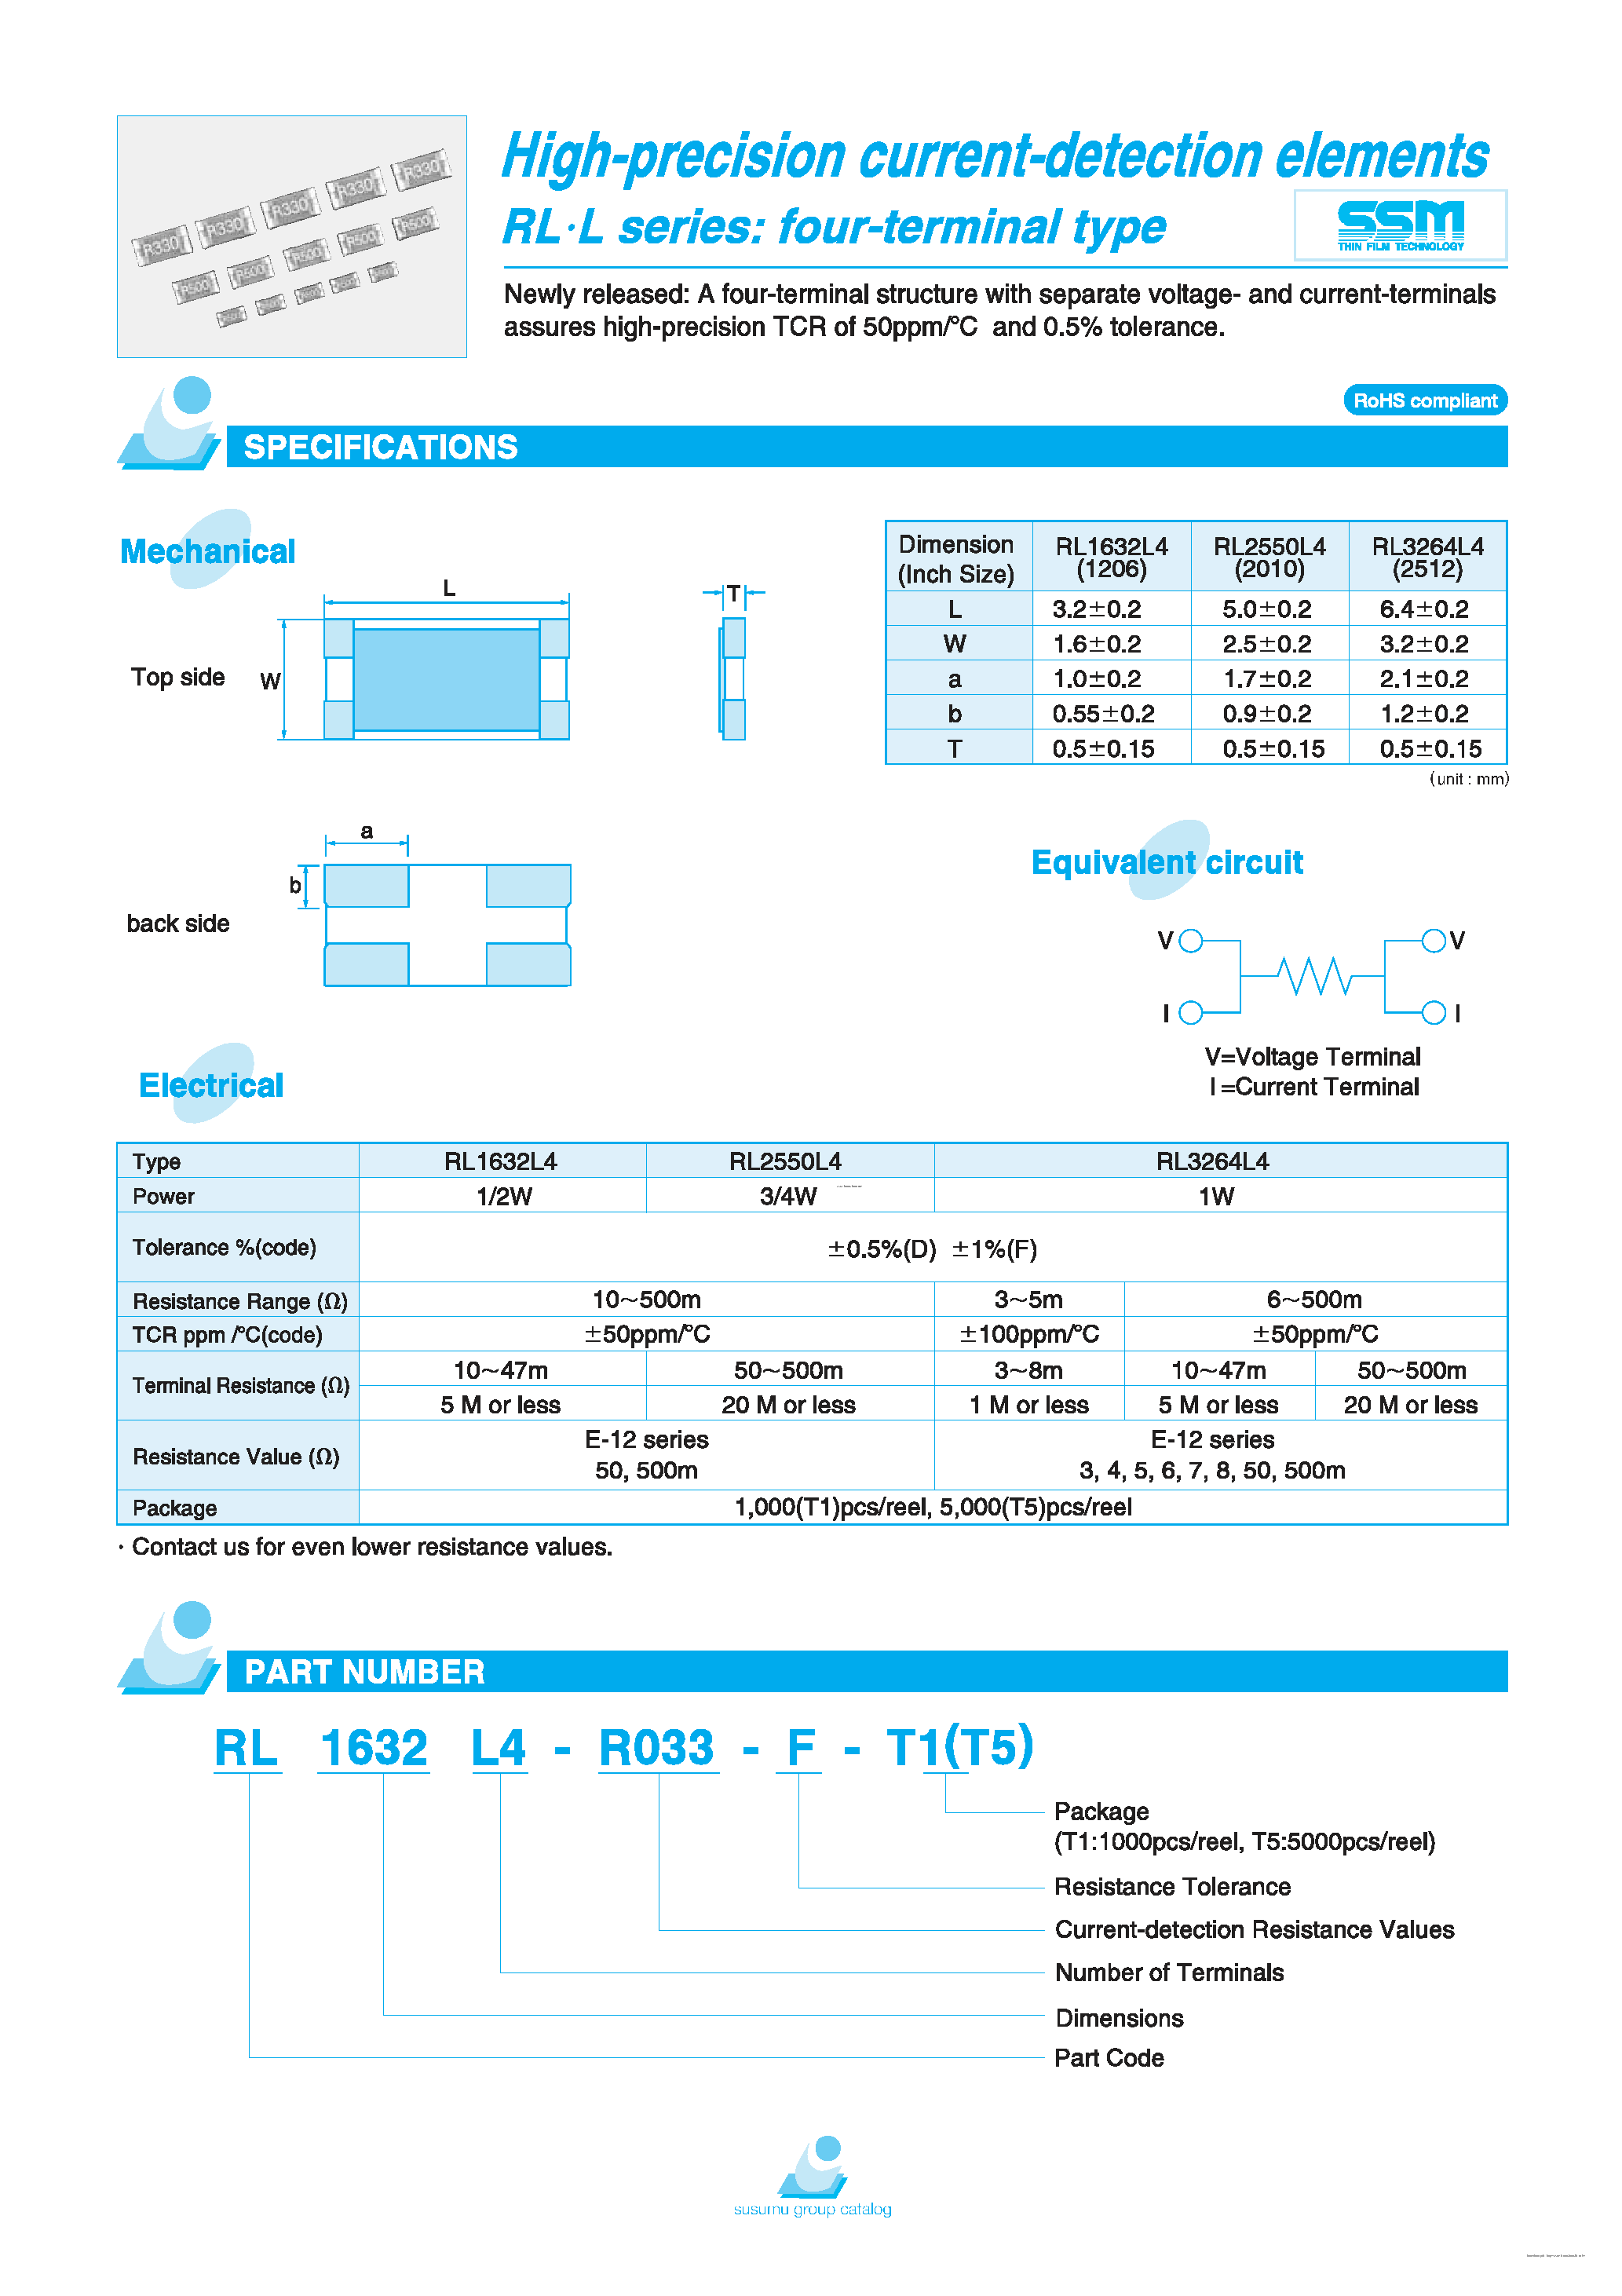 Datasheet RL1632L4-R033-F-T1 - High-precision current-detection elements page 1